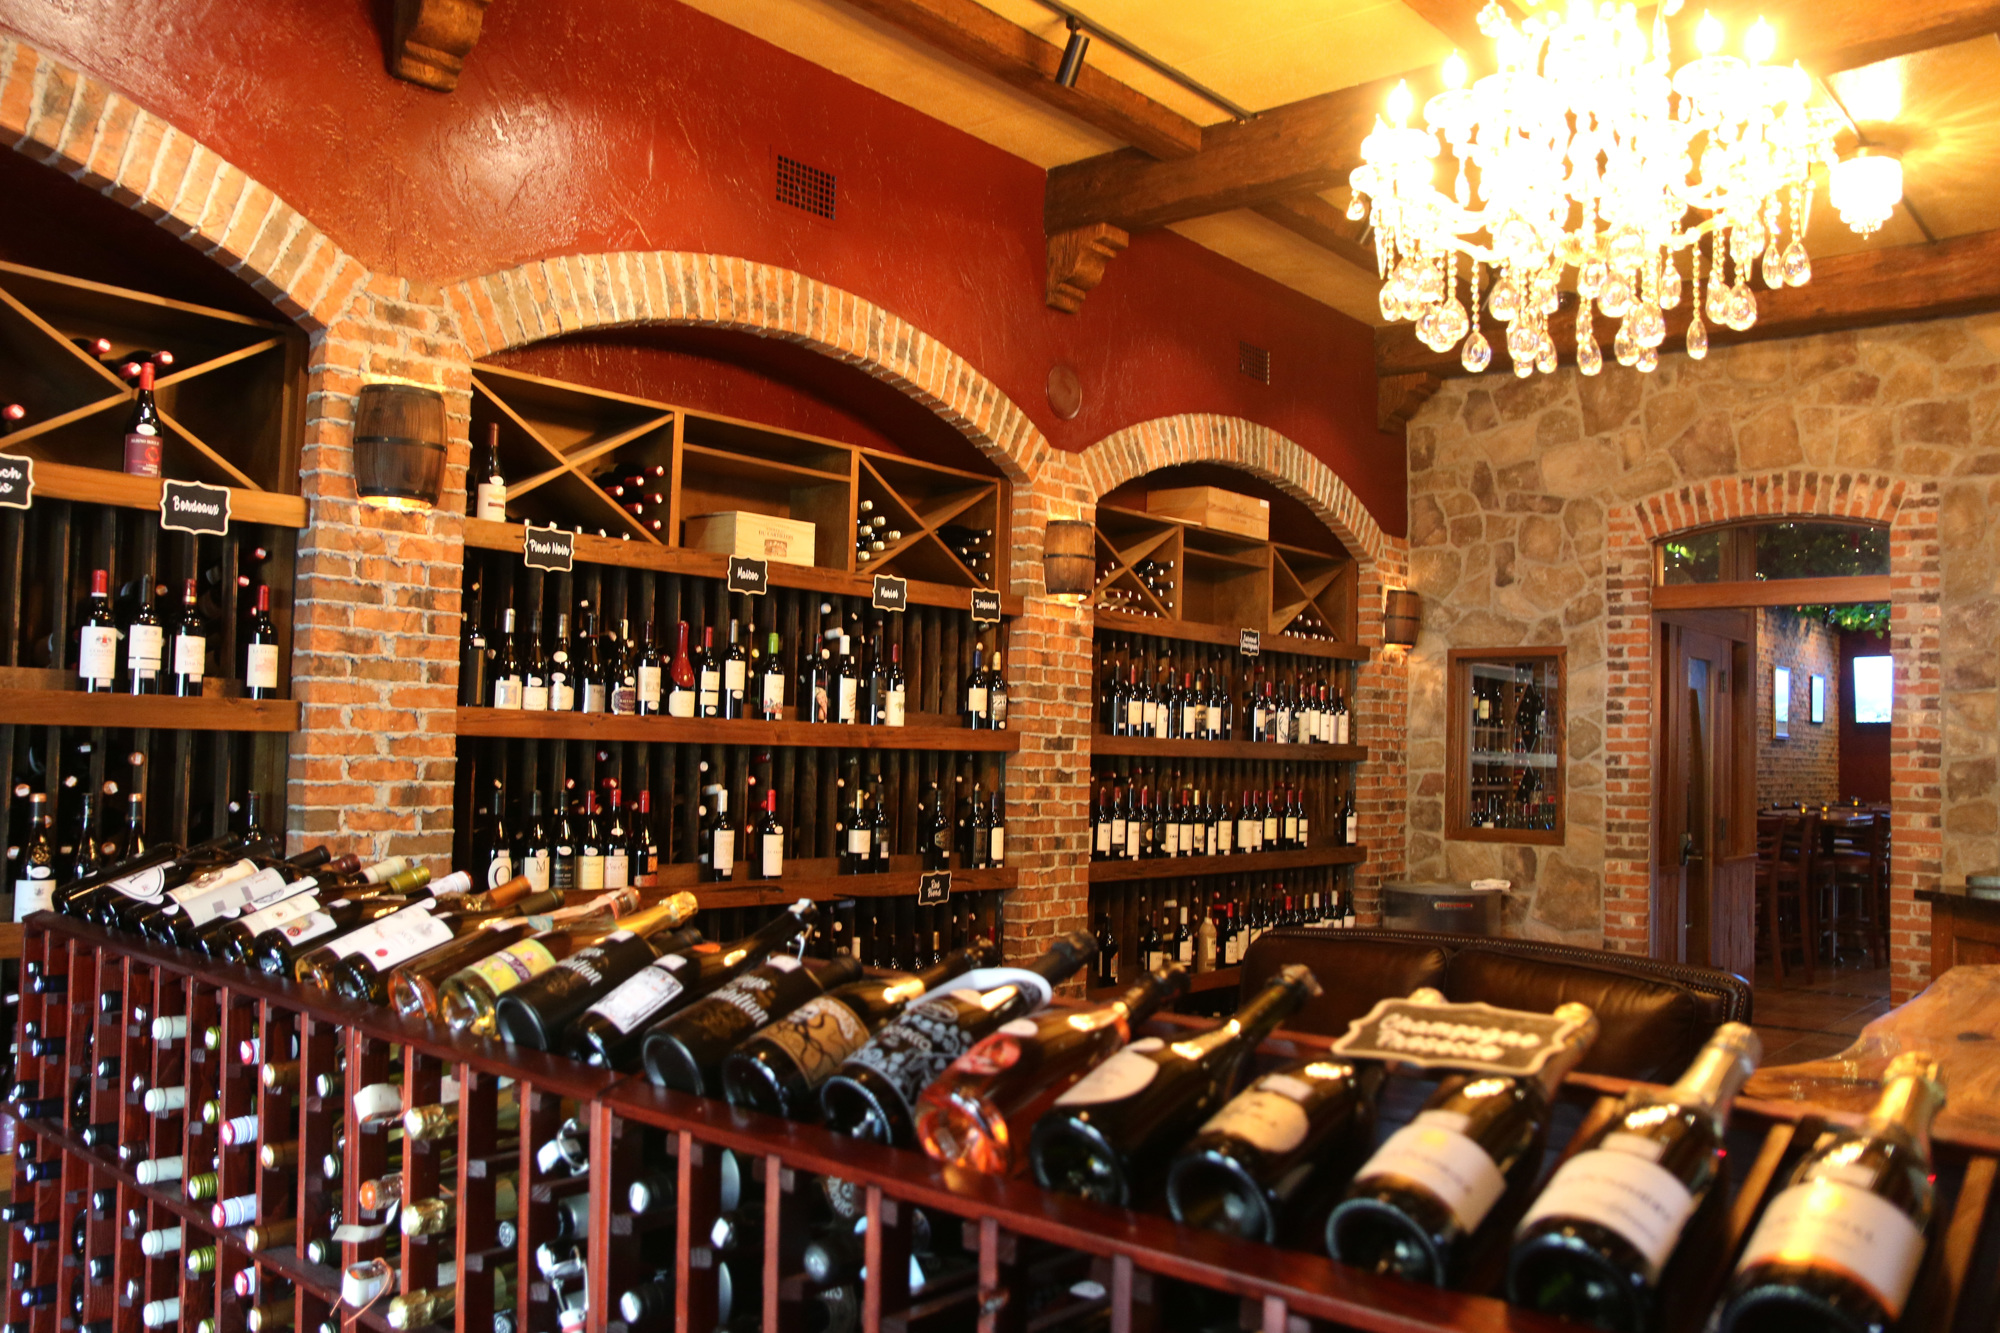 Wine Not? West features over 800 kinds of wines. Photo by Jarleene Almenas